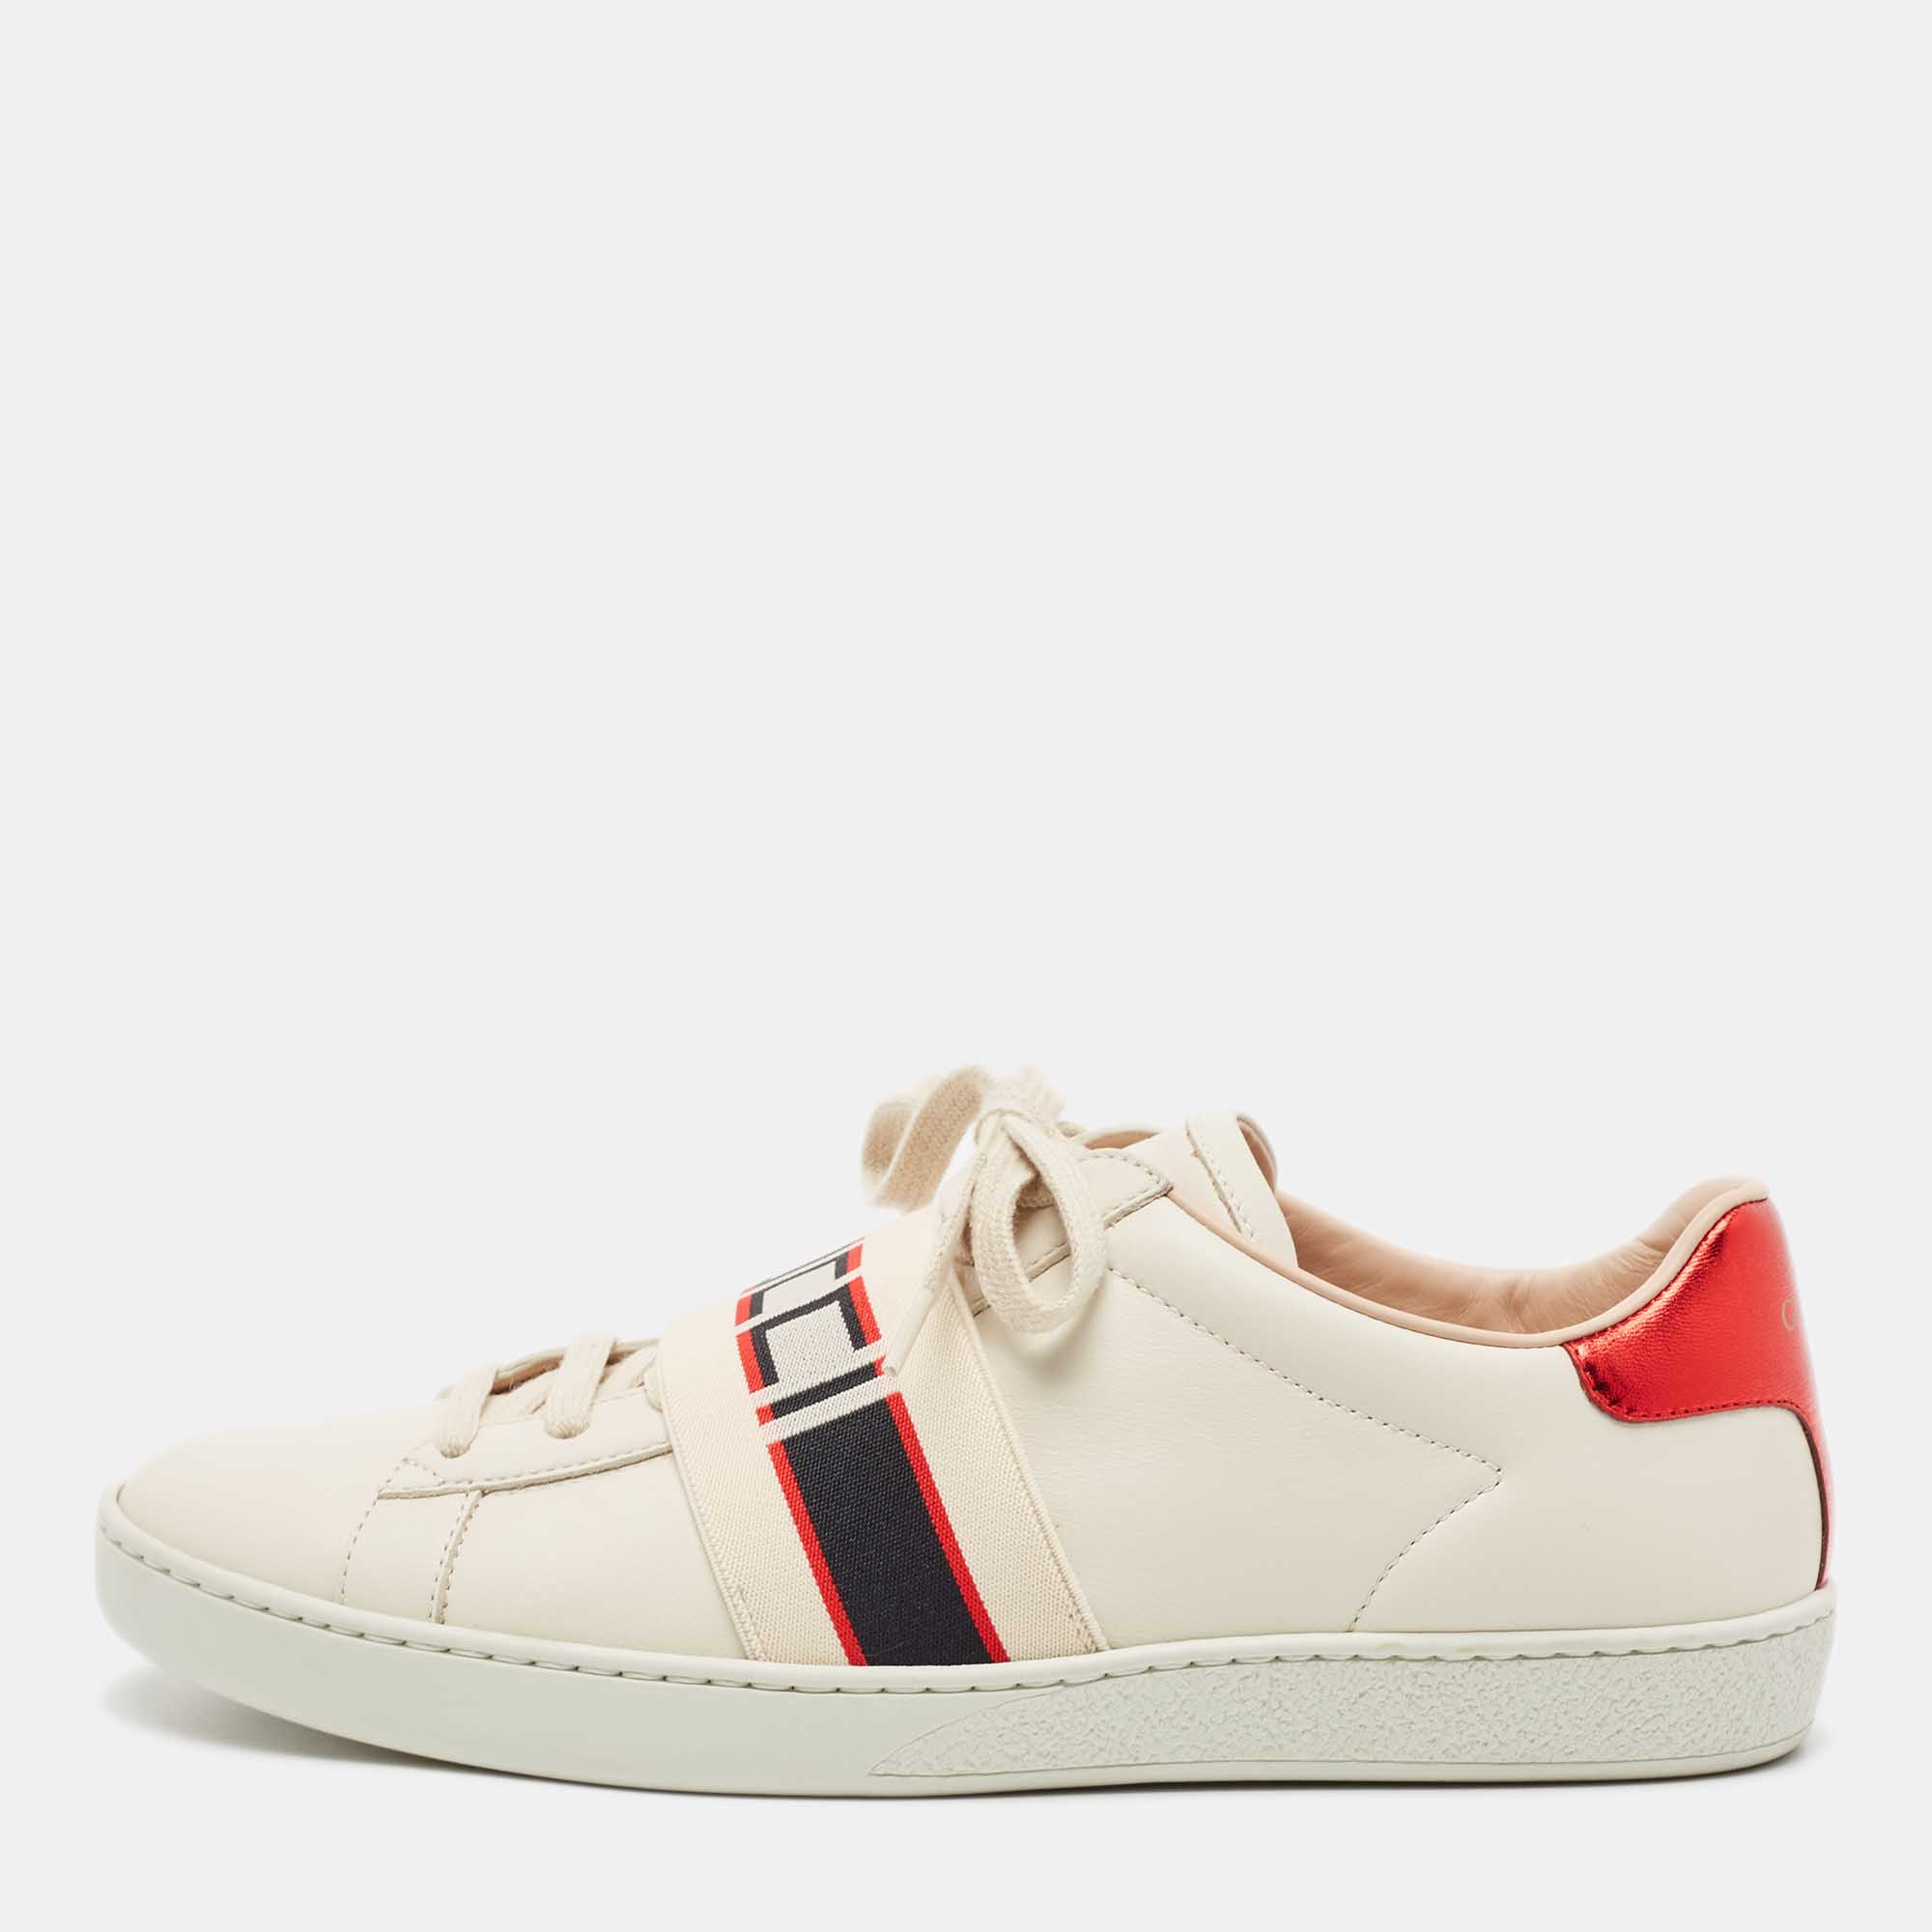 Pre-owned Gucci Cream Leather Logo Elastic Band Ace Trainers Size 39